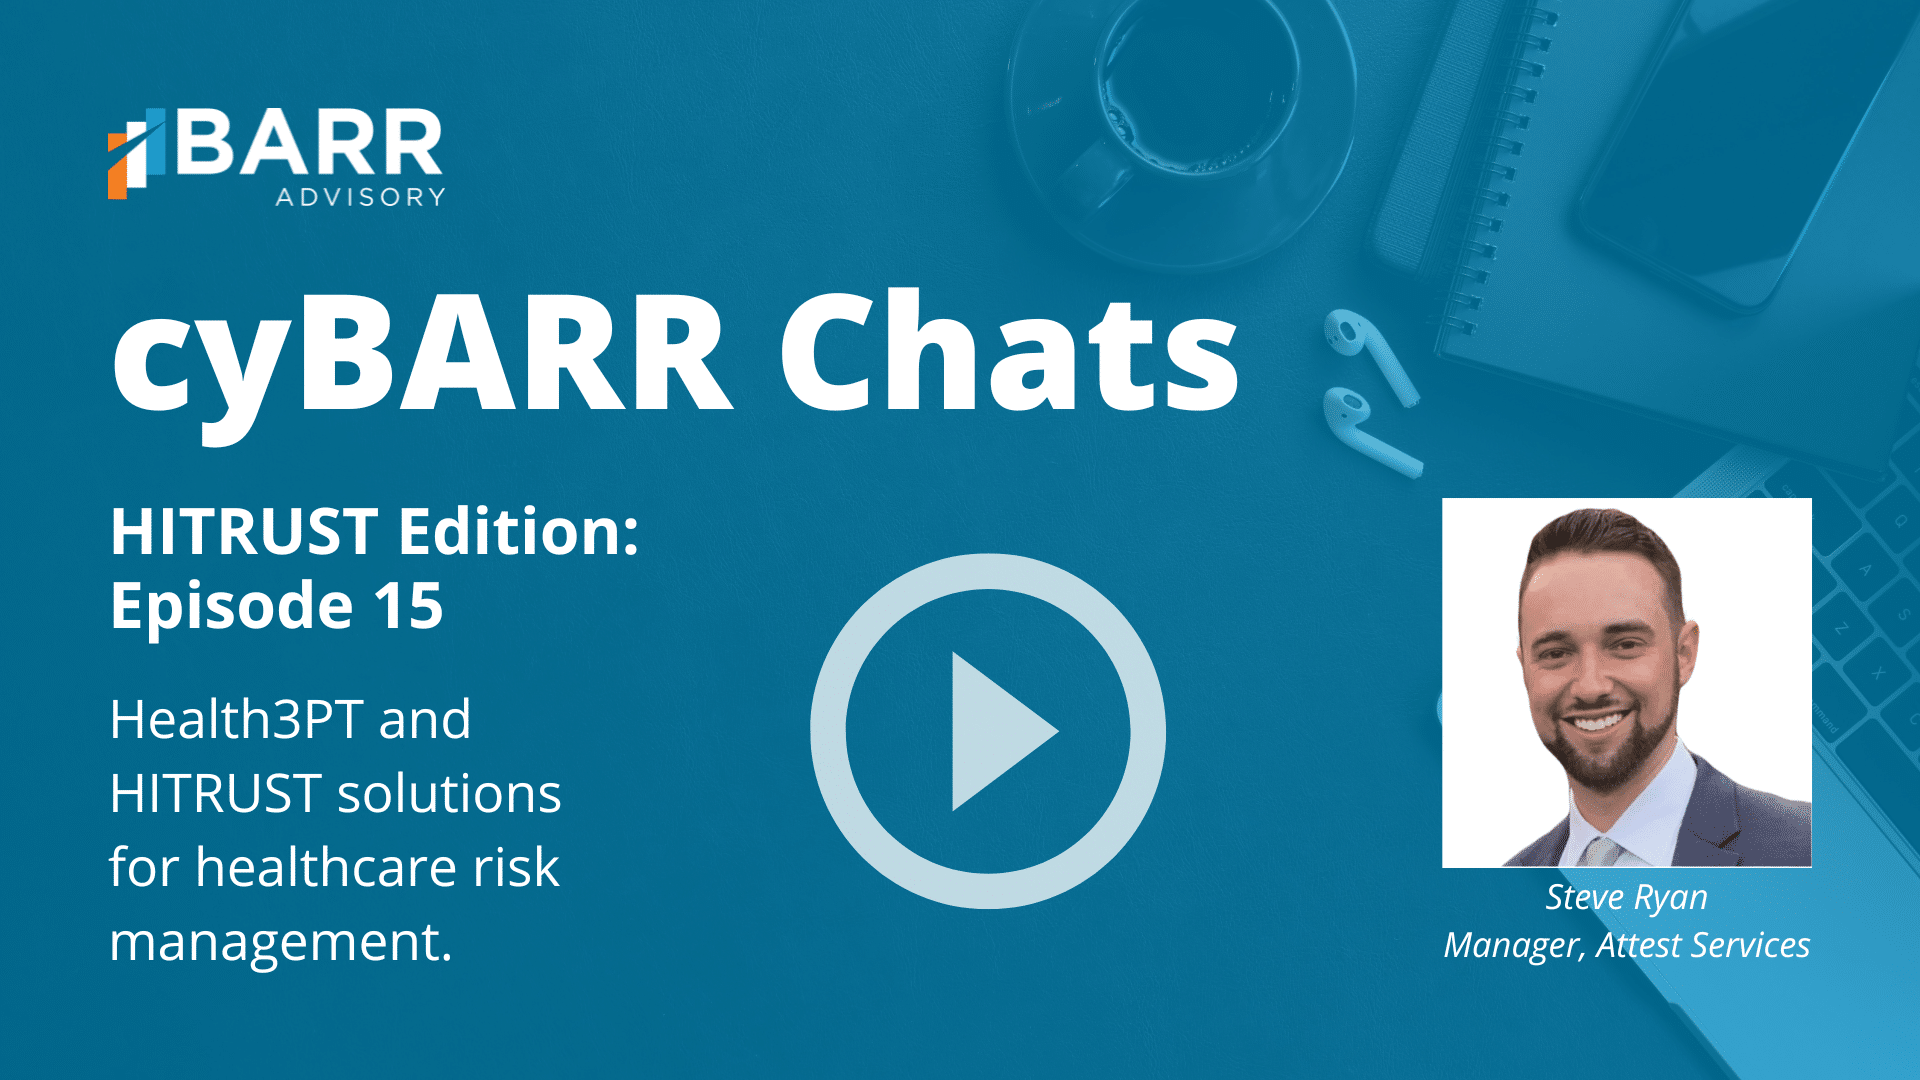 cyBARR Chats: HITRUST Edition Episode 15, Health3PT Initiatives for Risk Management Solutions